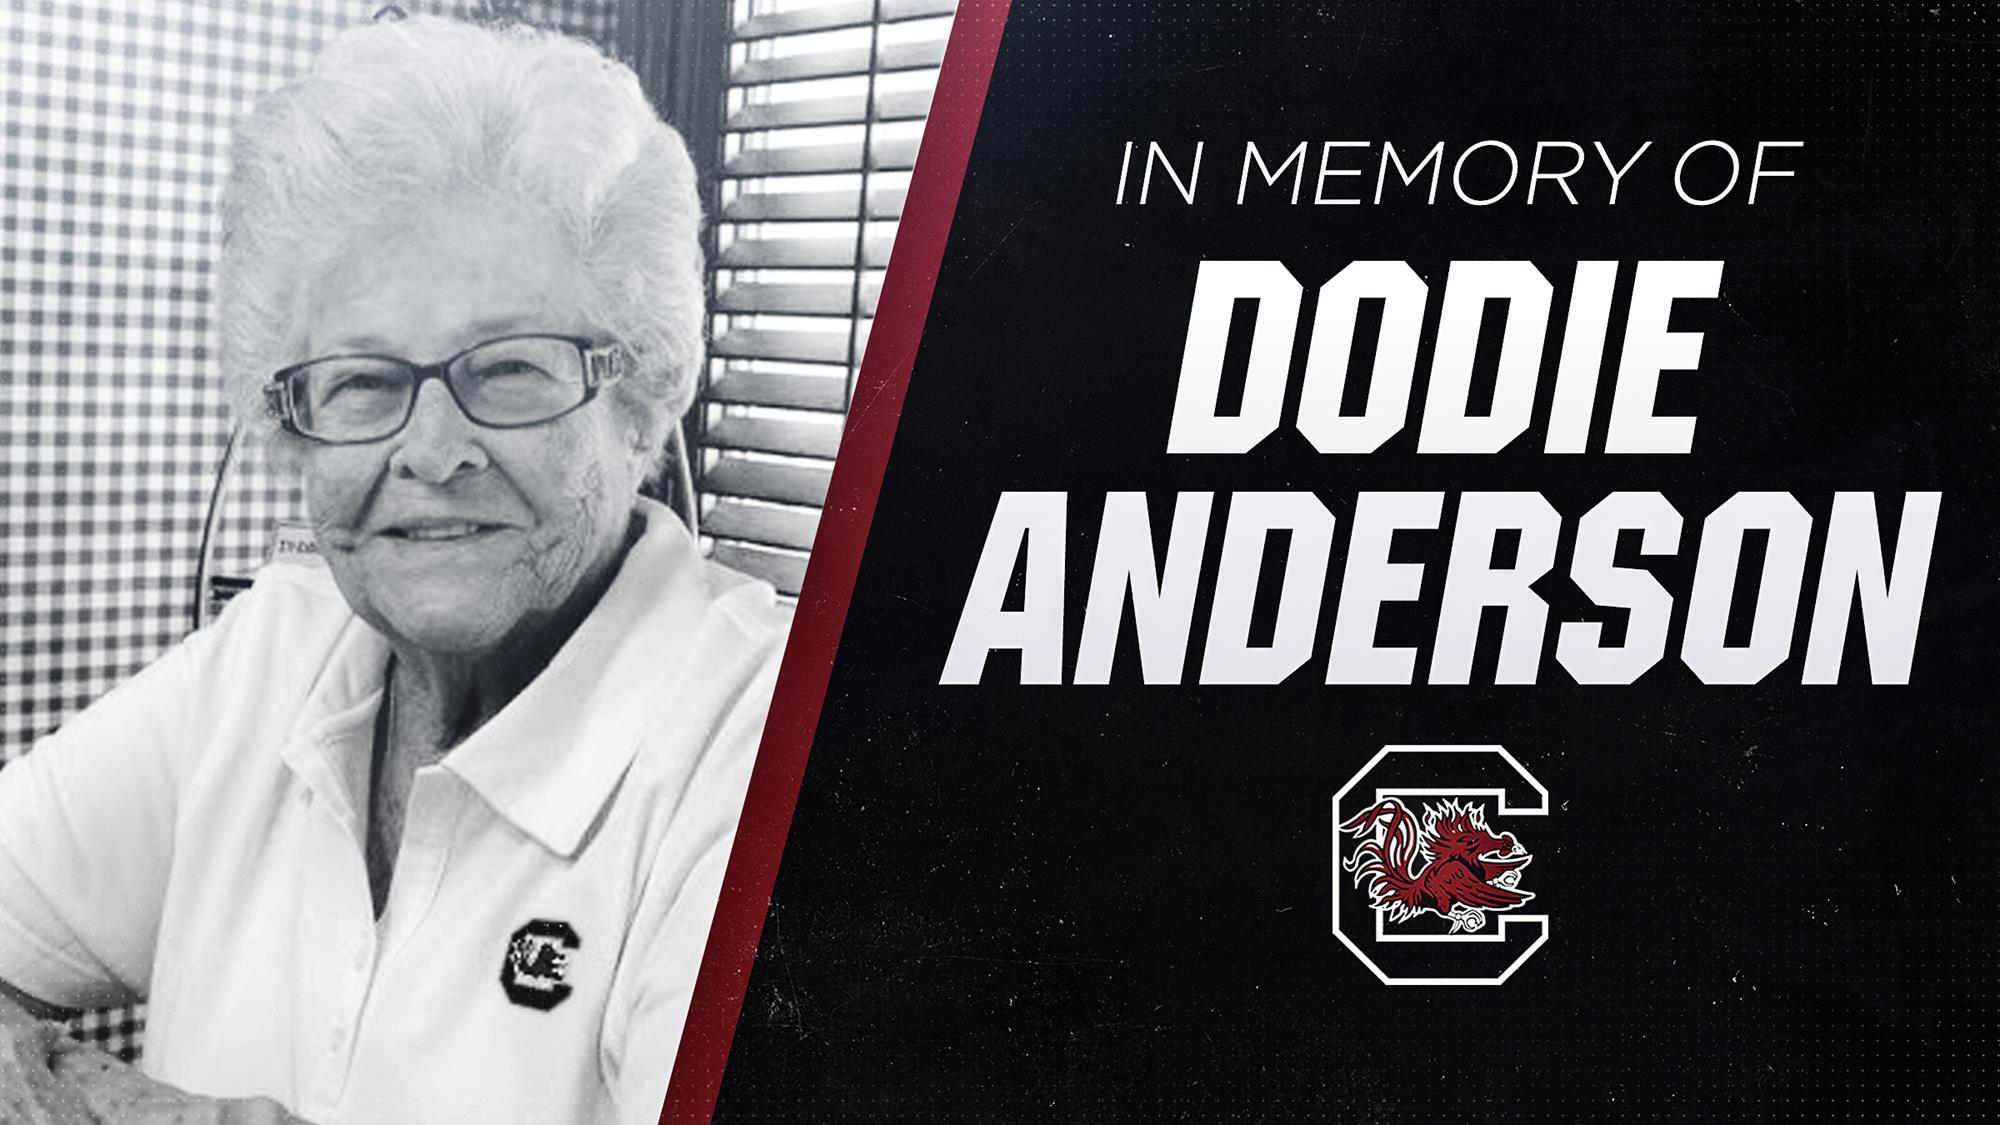 The Gamecocks mourn the passing of Dodie Anderson